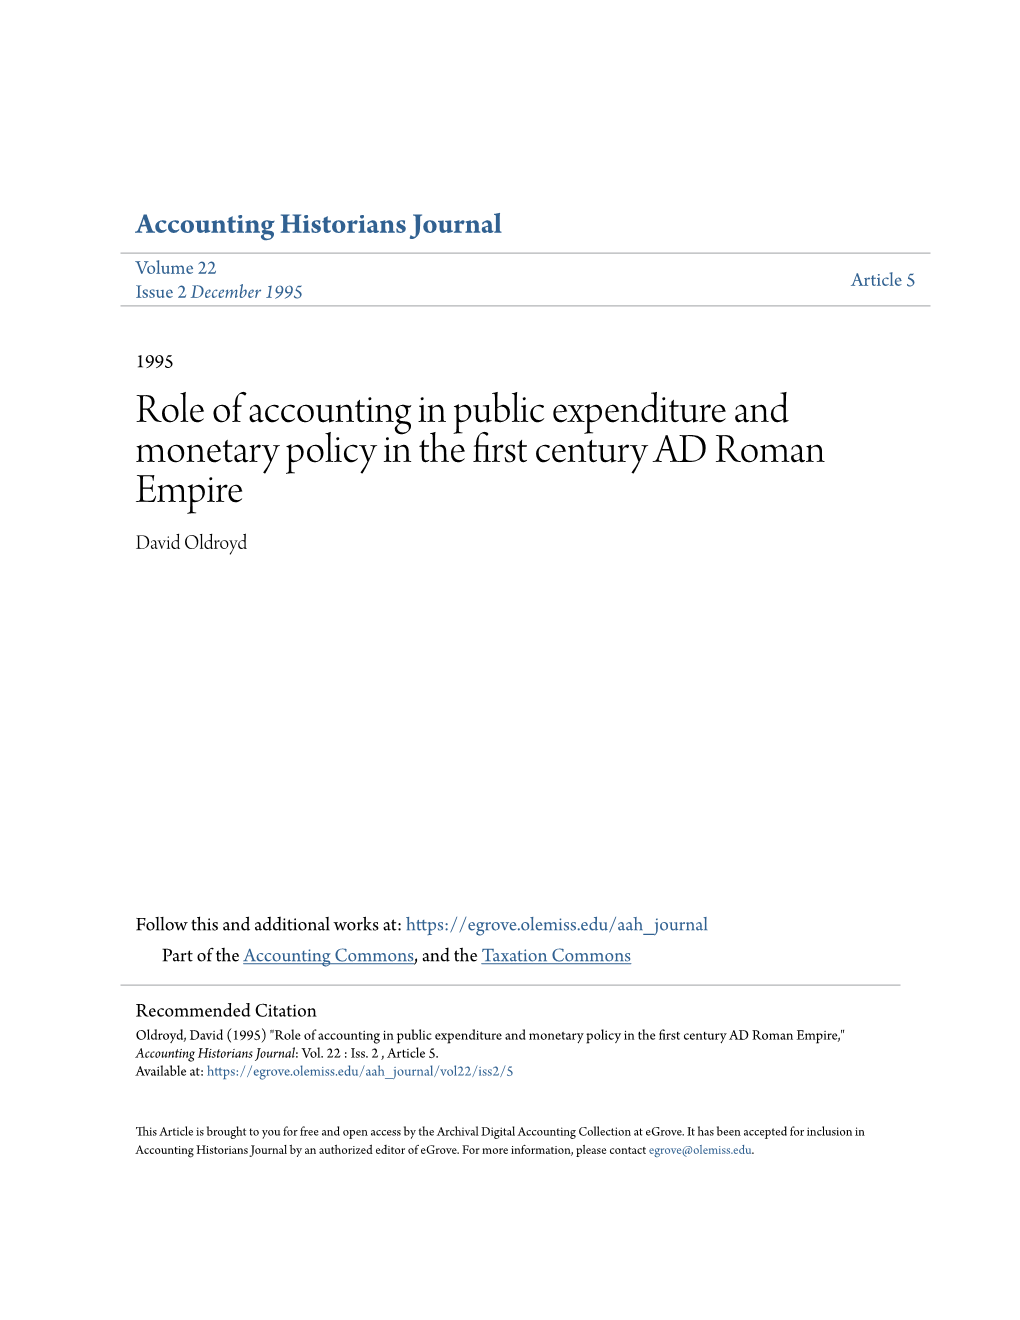 Role of Accounting in Public Expenditure and Monetary Policy in the First Century AD Roman Empire David Oldroyd